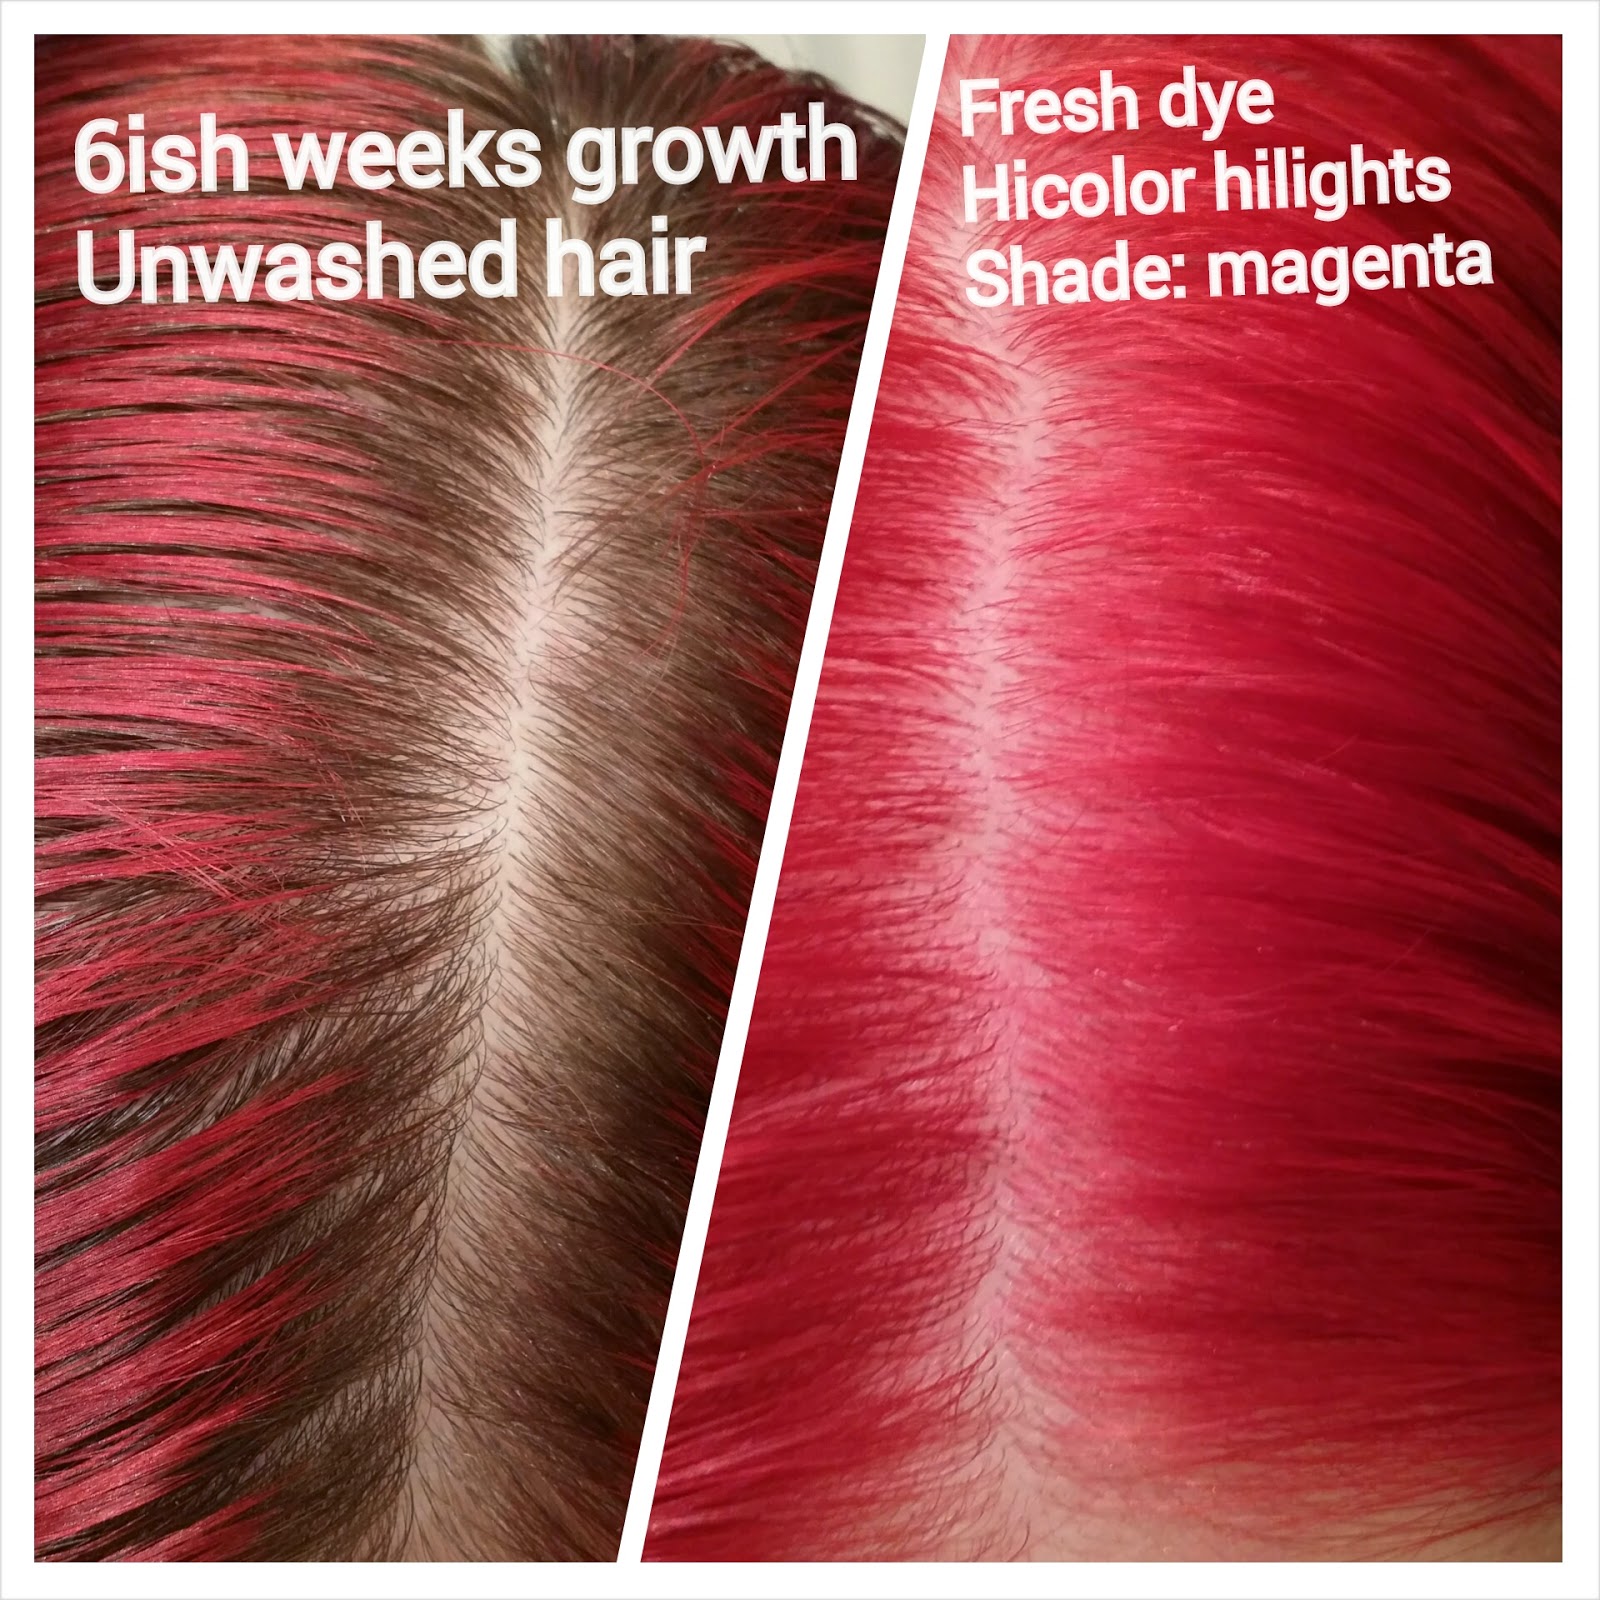 L'Oreal Magenta Hair Color Before and After. 